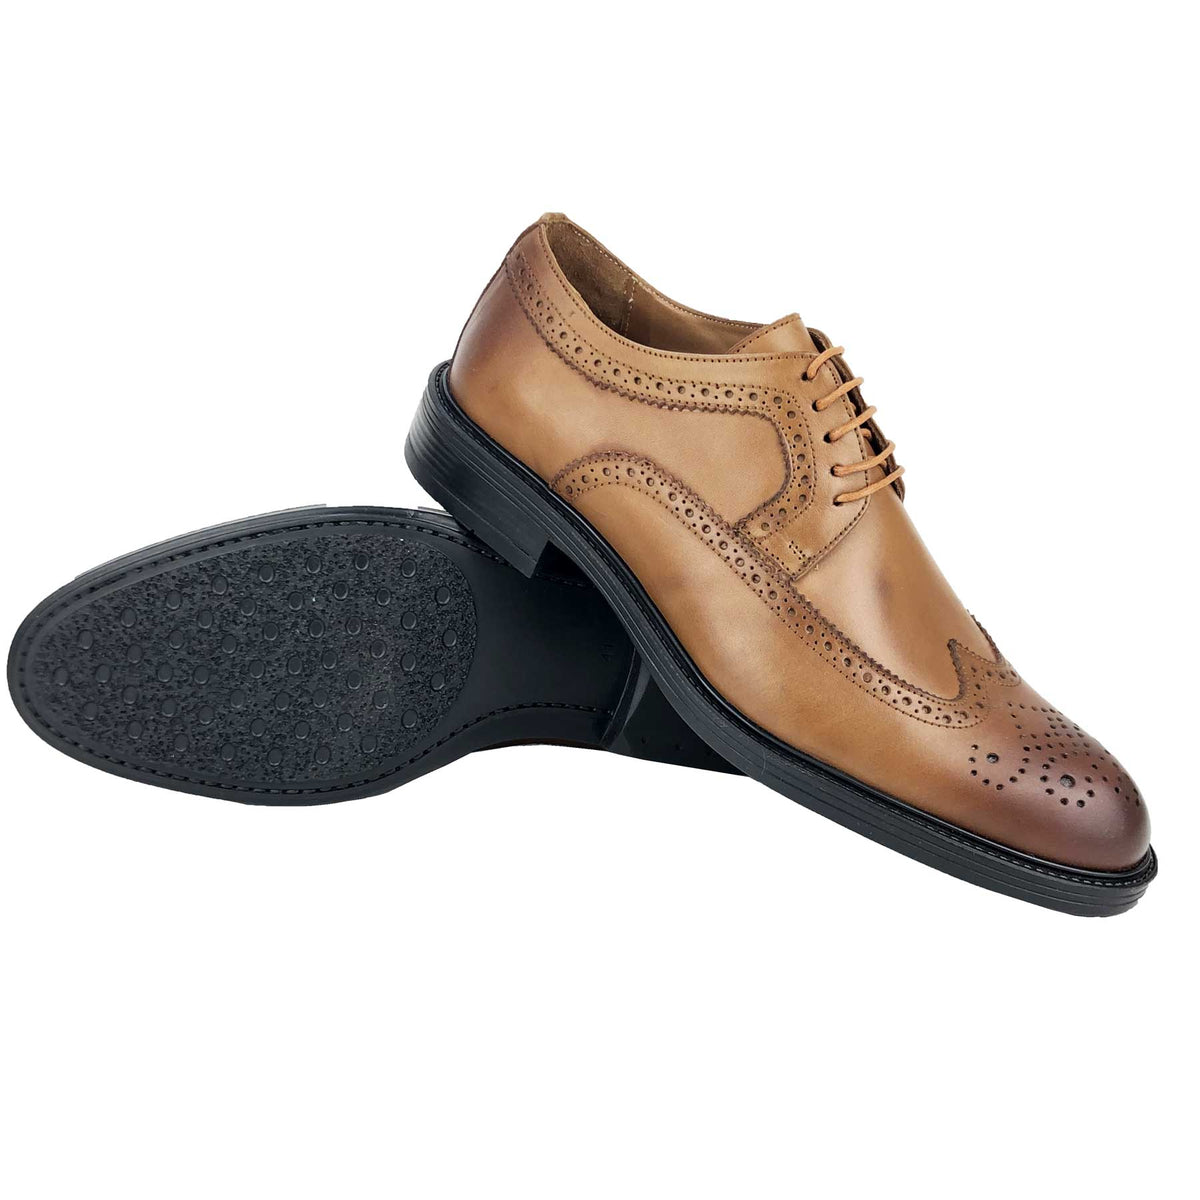 CH312-015 - Chaussure cuir sable - deluxe-maroc